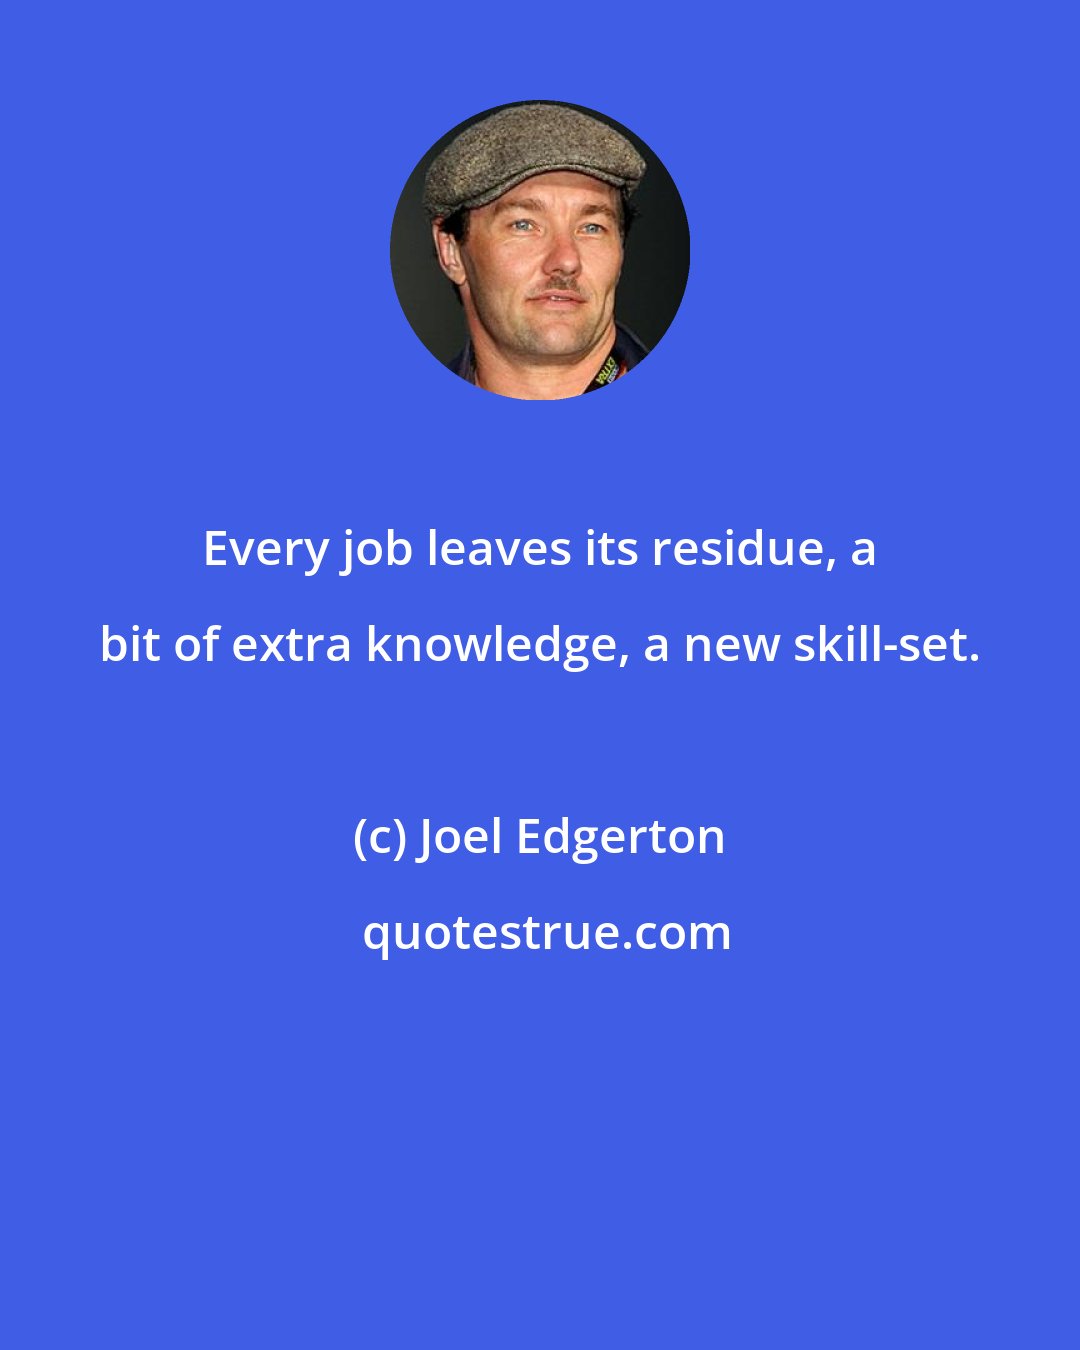 Joel Edgerton: Every job leaves its residue, a bit of extra knowledge, a new skill-set.